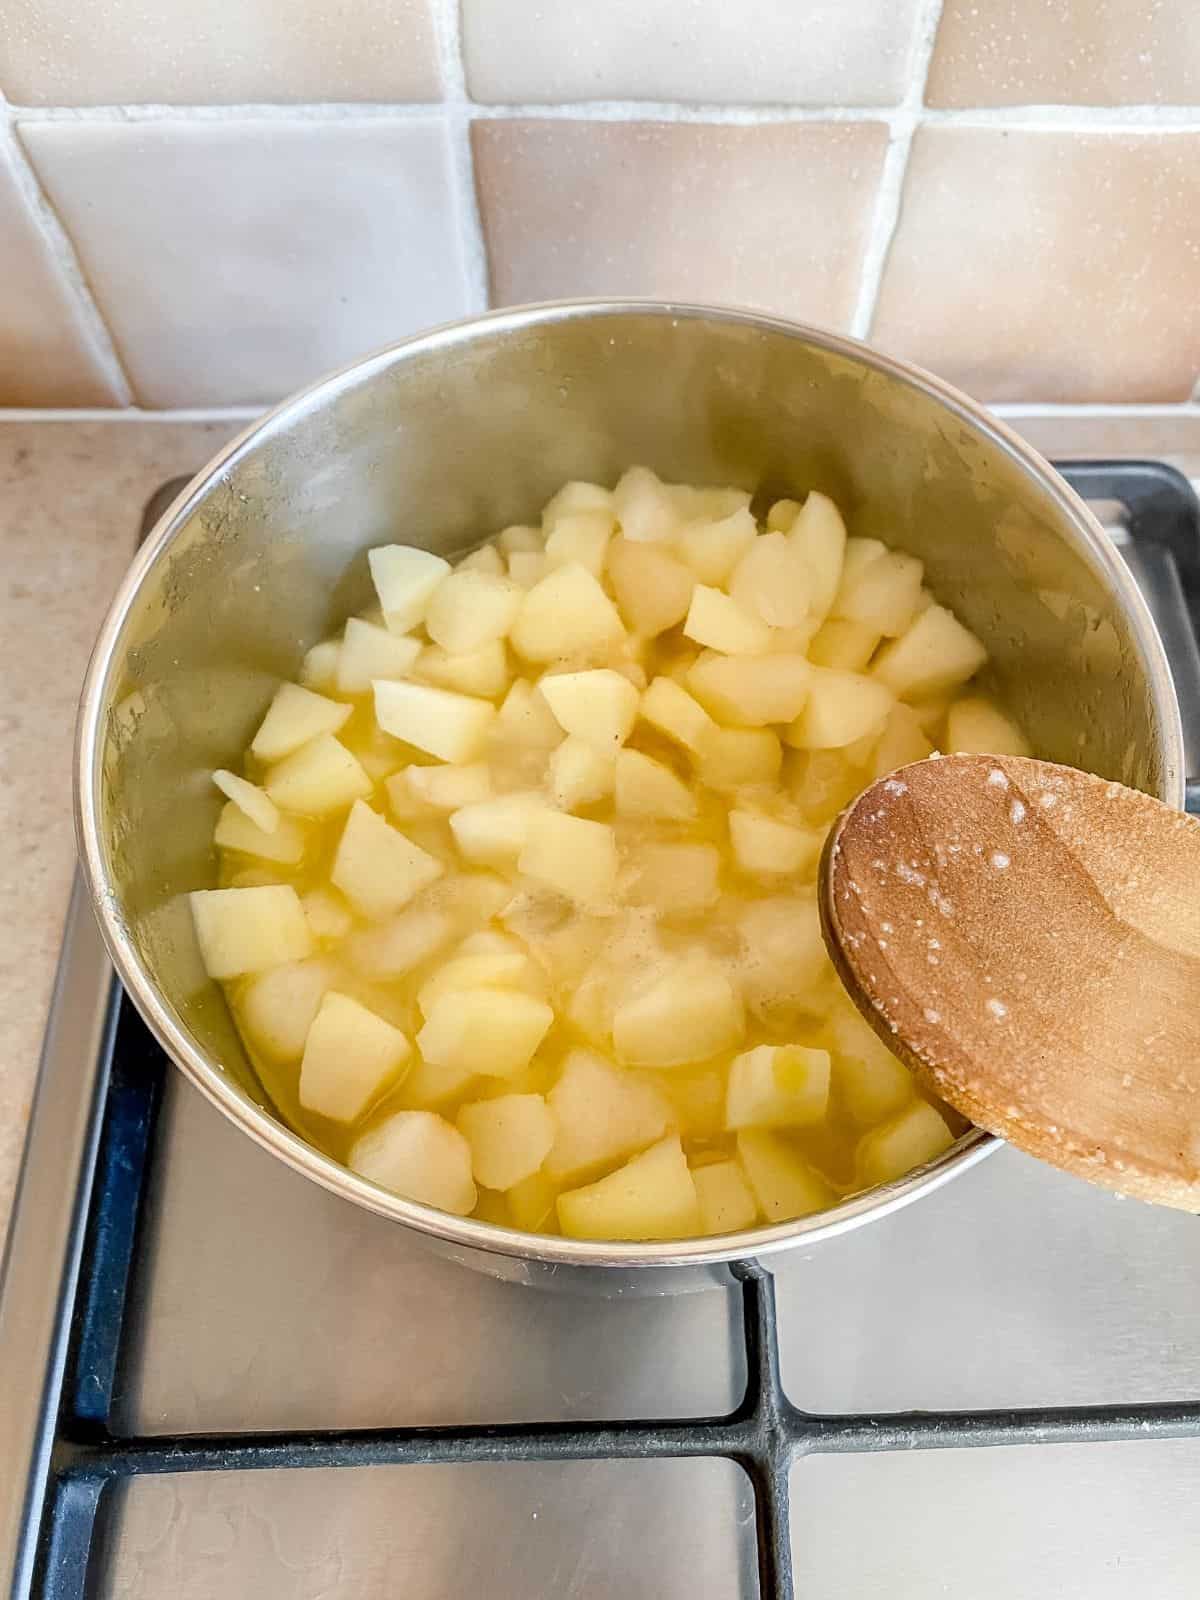 cooked apple and pear in a pan.